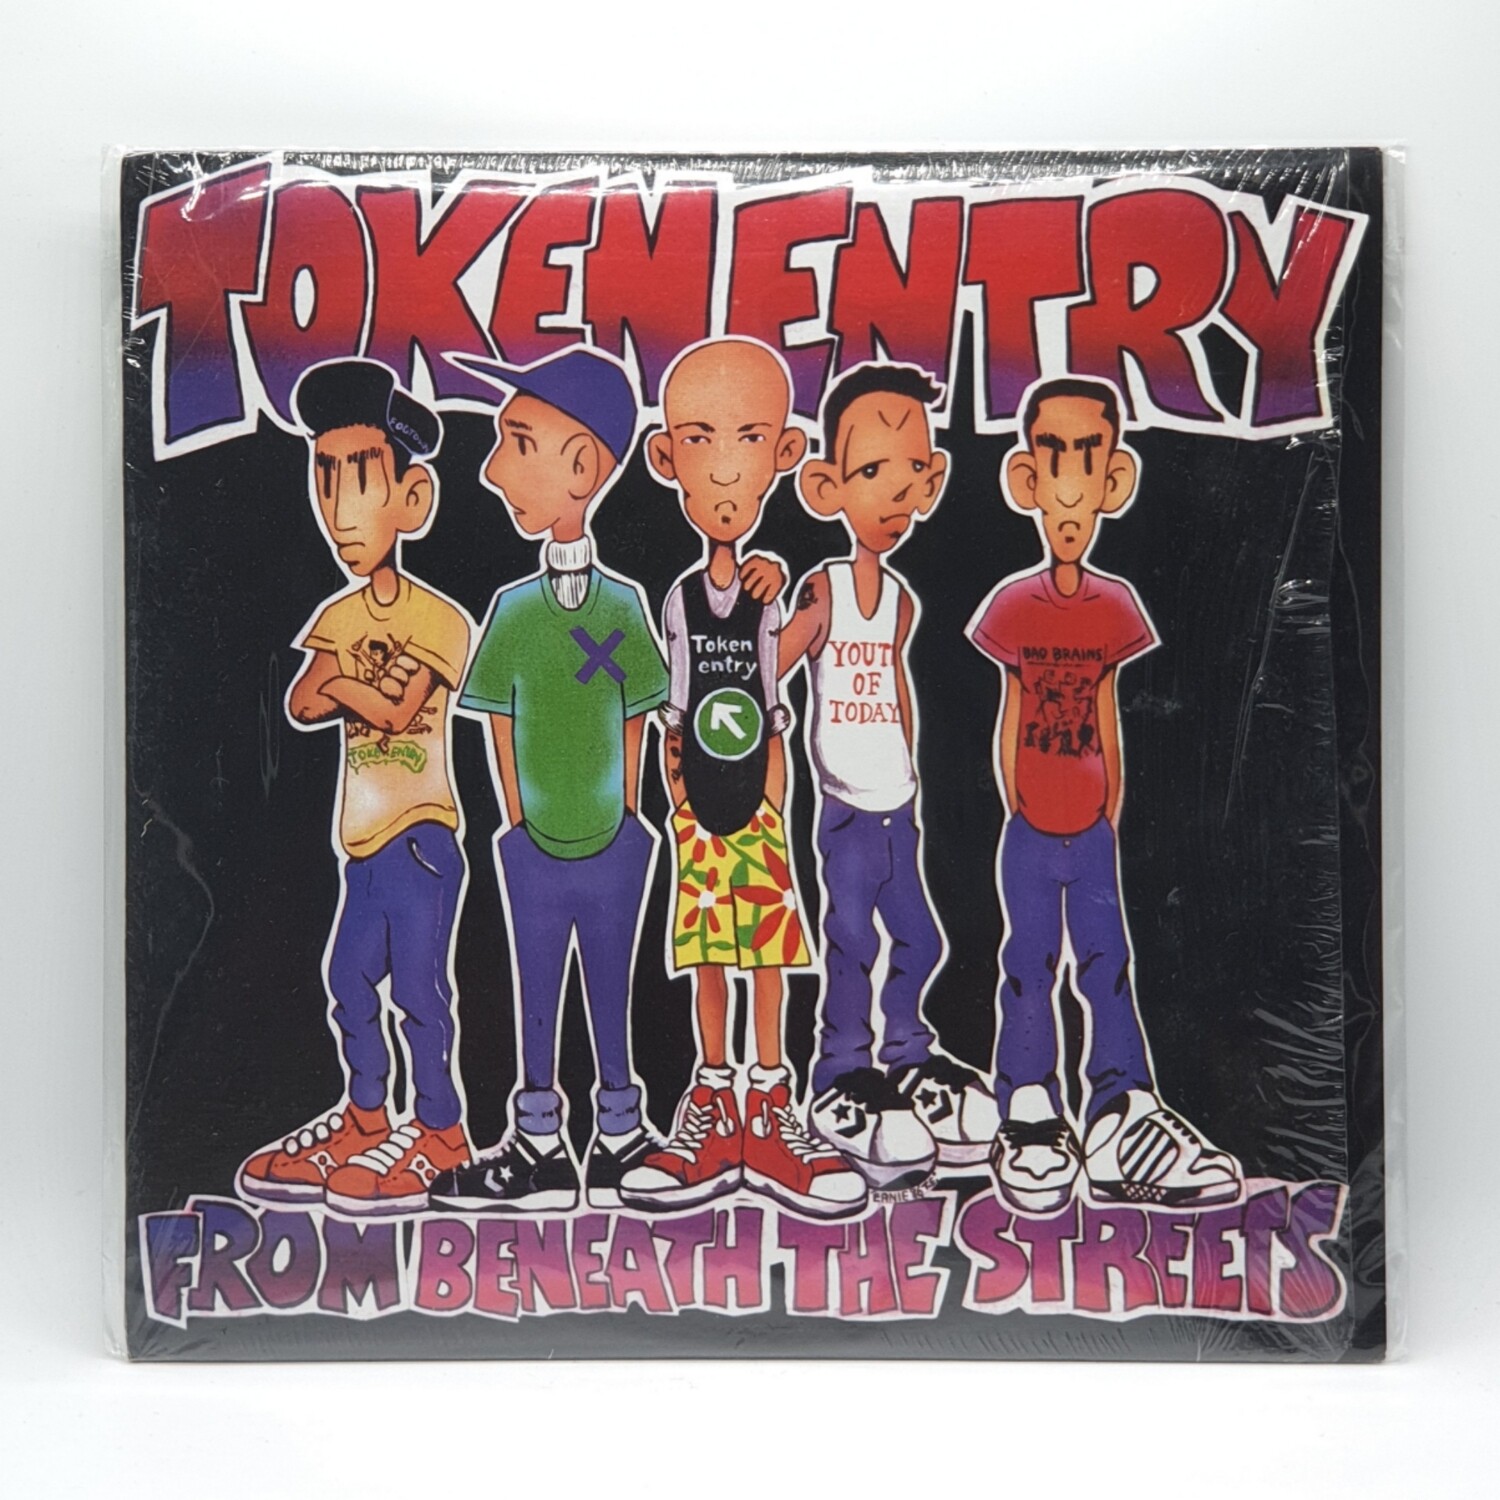 [USED] TOKEN ENTRY -FROM BENEATH THE STREETS- LP (RED VINYL)